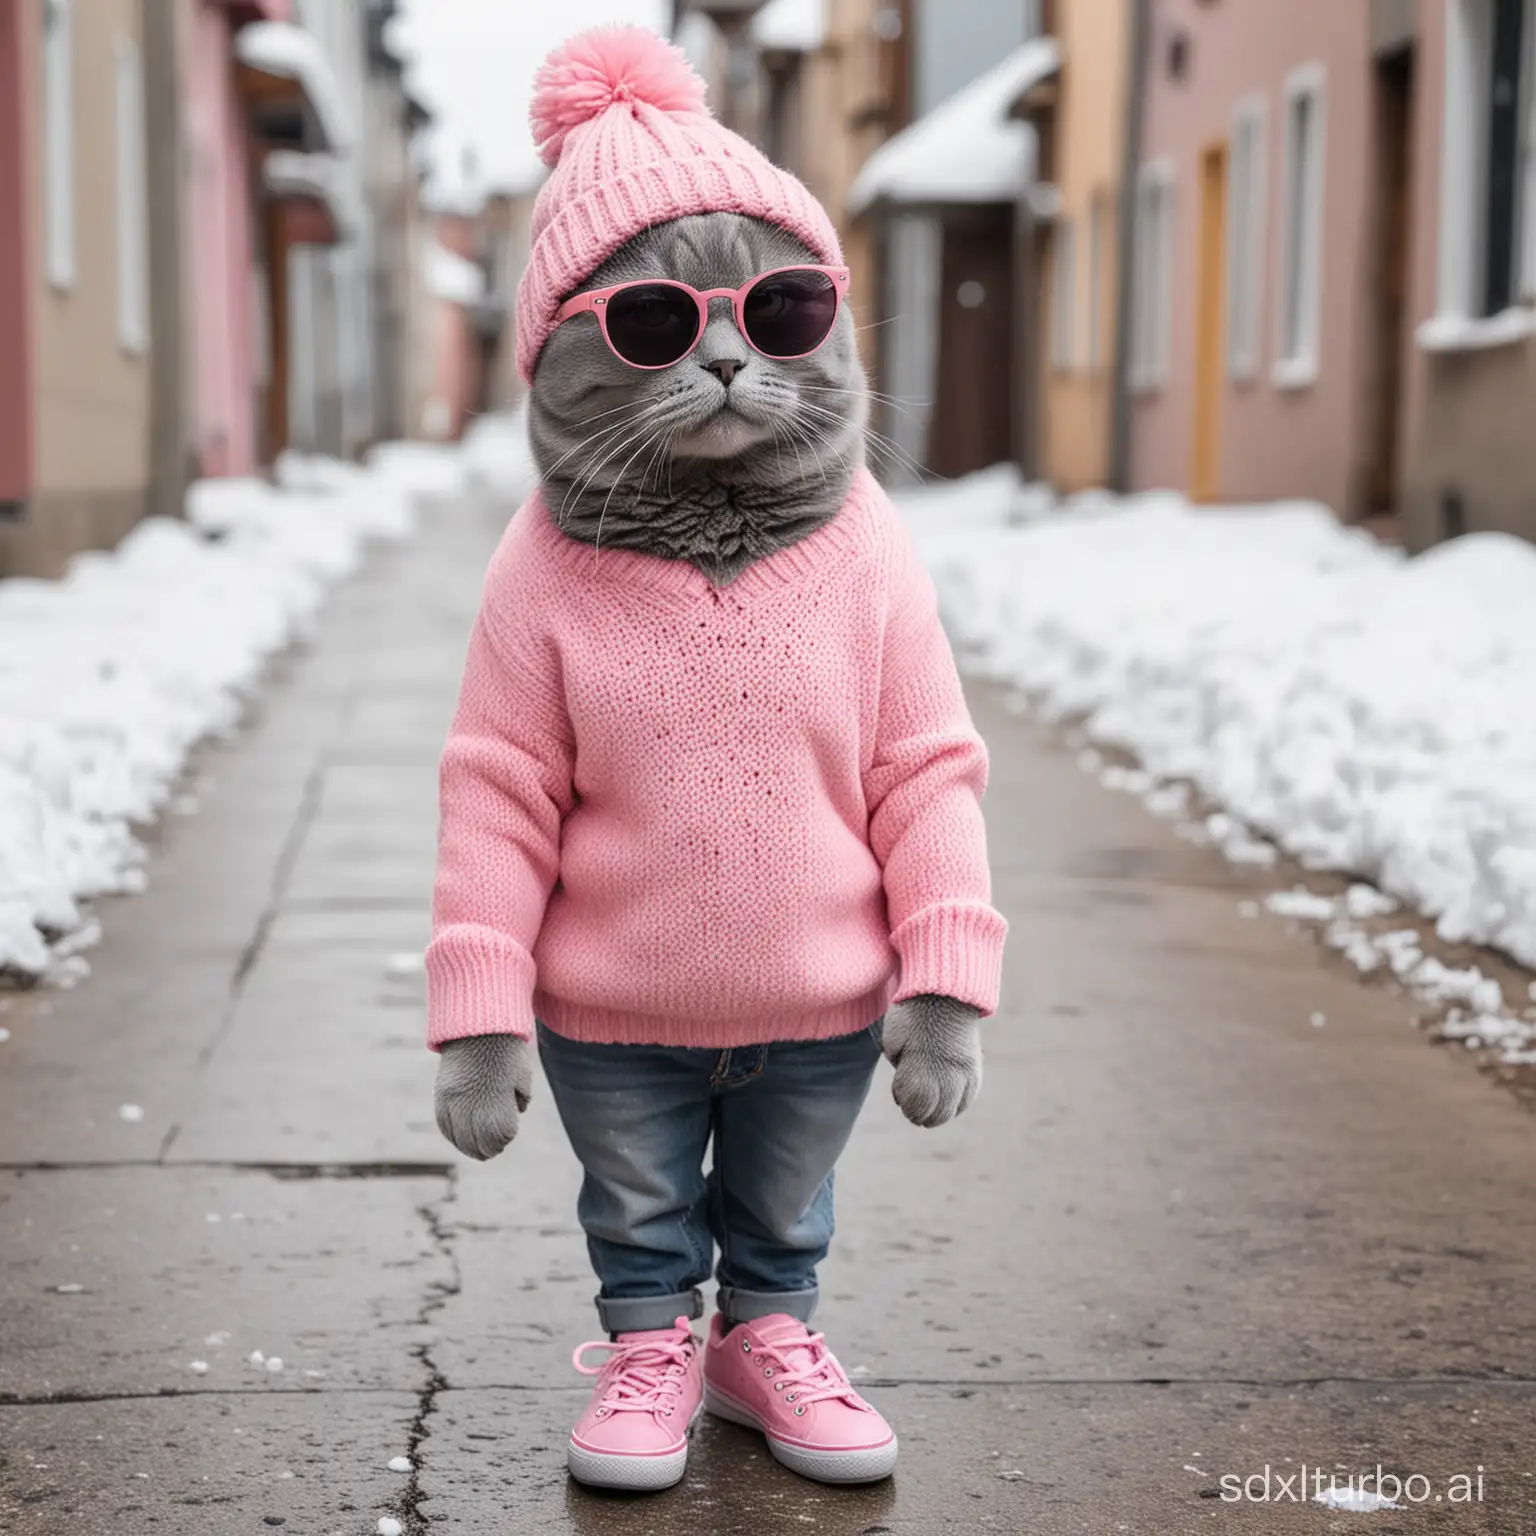 a grey color cat wear pink sweater and jeans, with  sunglasses, hat,  with shoes, walk on a snow street